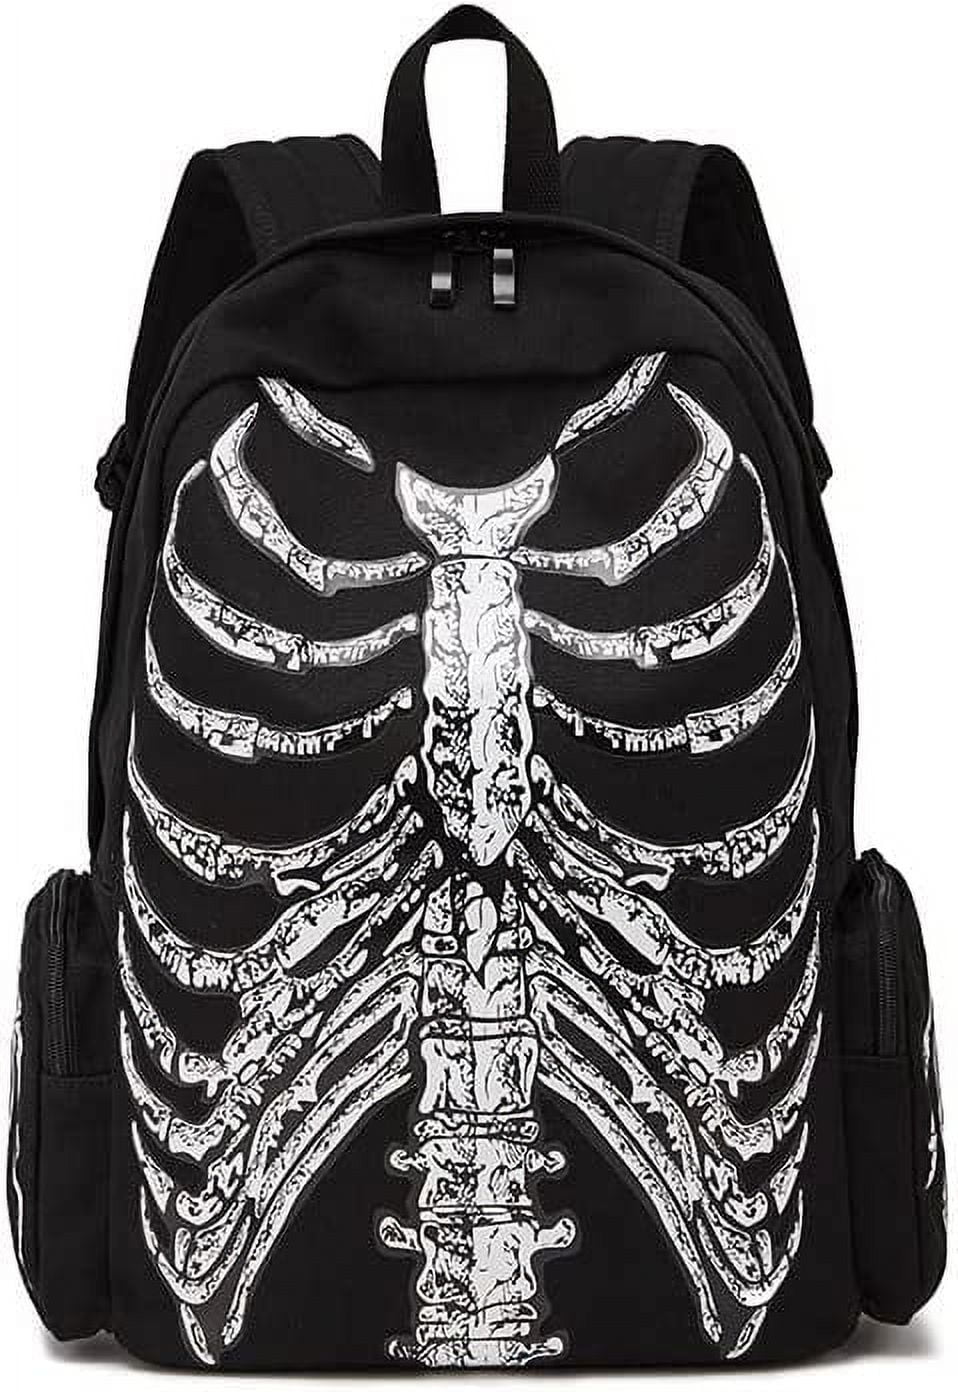 Monster Mash Goth Pillowcase Gothic Backpack Cushion For Home Diy